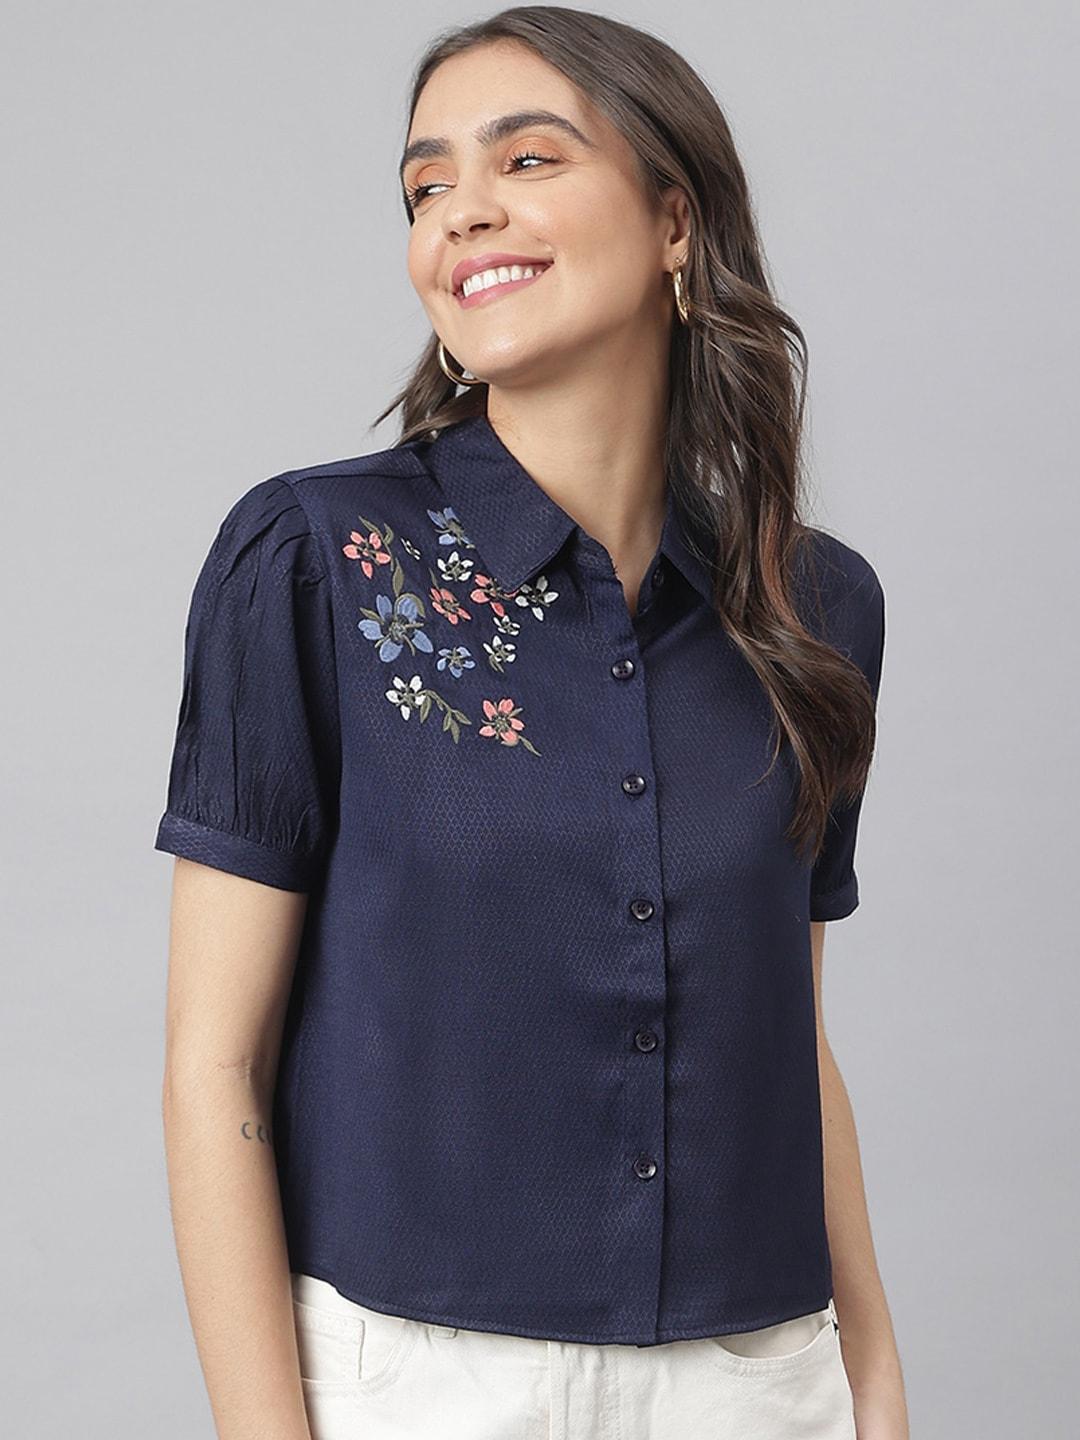 Miss Grace Floral Embroidered Puff Sleeves Shirt Style Top